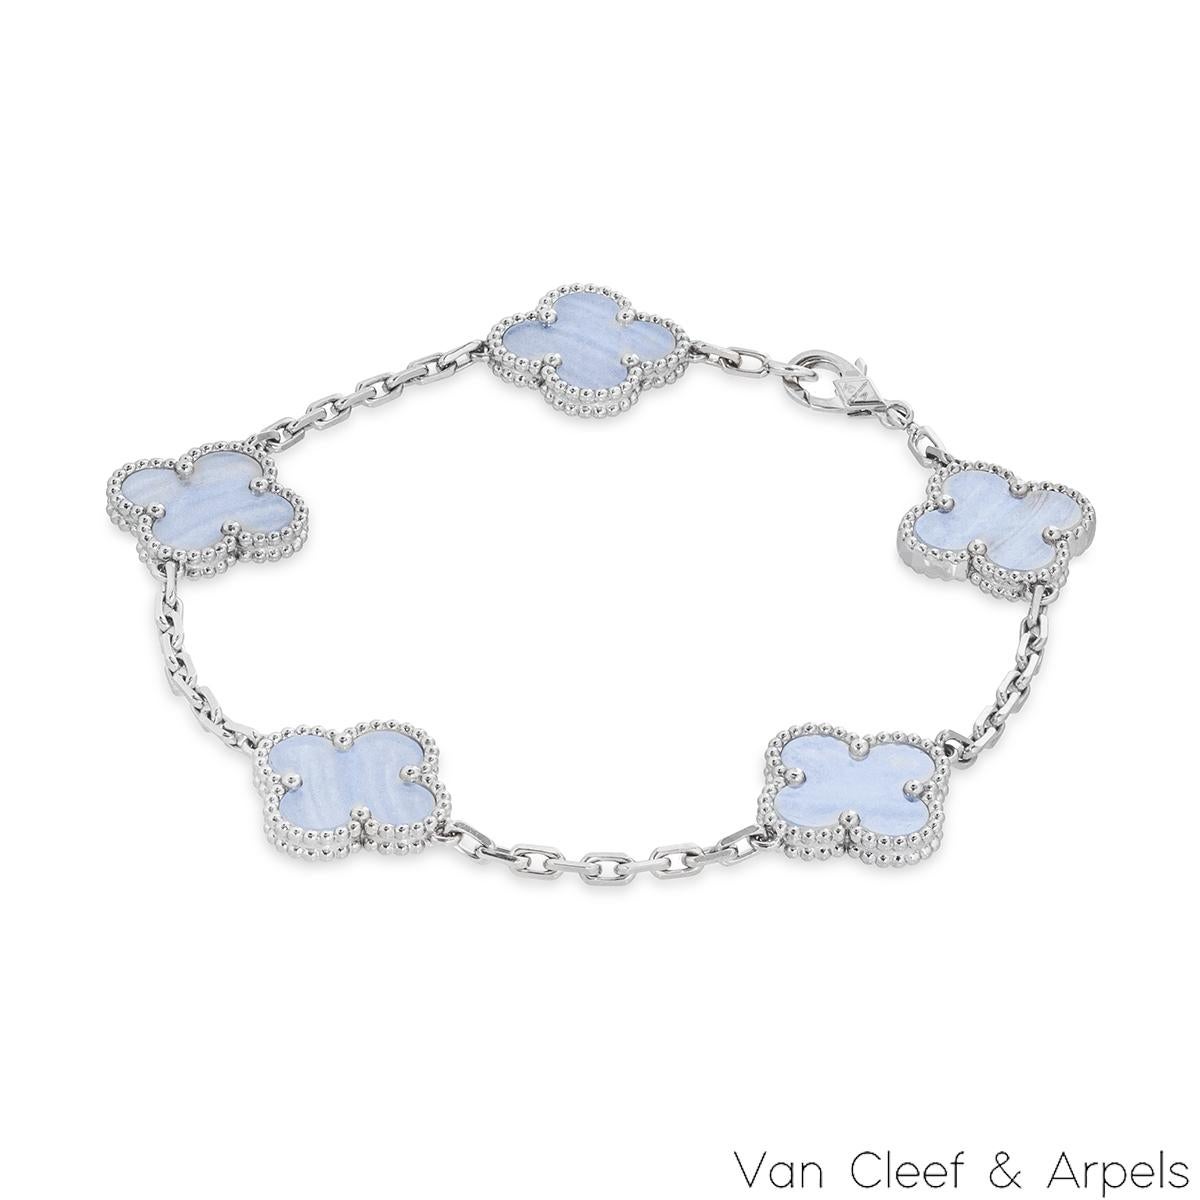 An 18k white gold bracelet from the Vintage Alhambra collection by Van Cleef and Arpels. The bracelet is made up of 5 iconic clover motifs, each set with a beaded edge and a chalcedony inlay, set throughout the length of the chain. The bracelet